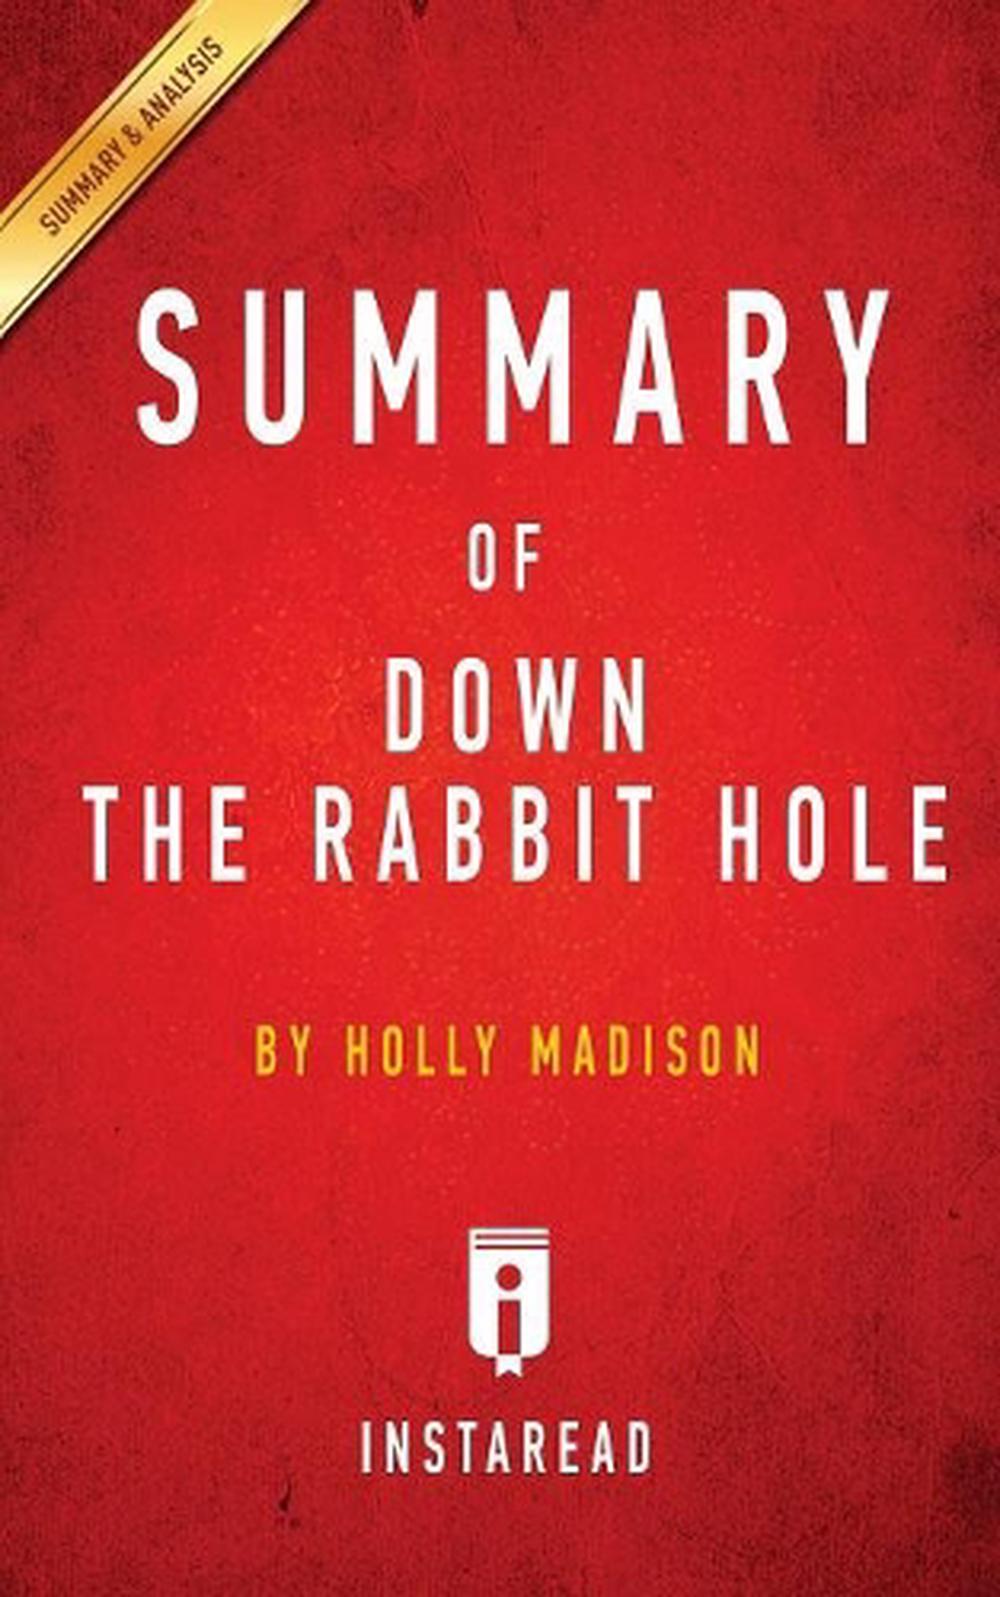 down the rabbit hole holly madison book